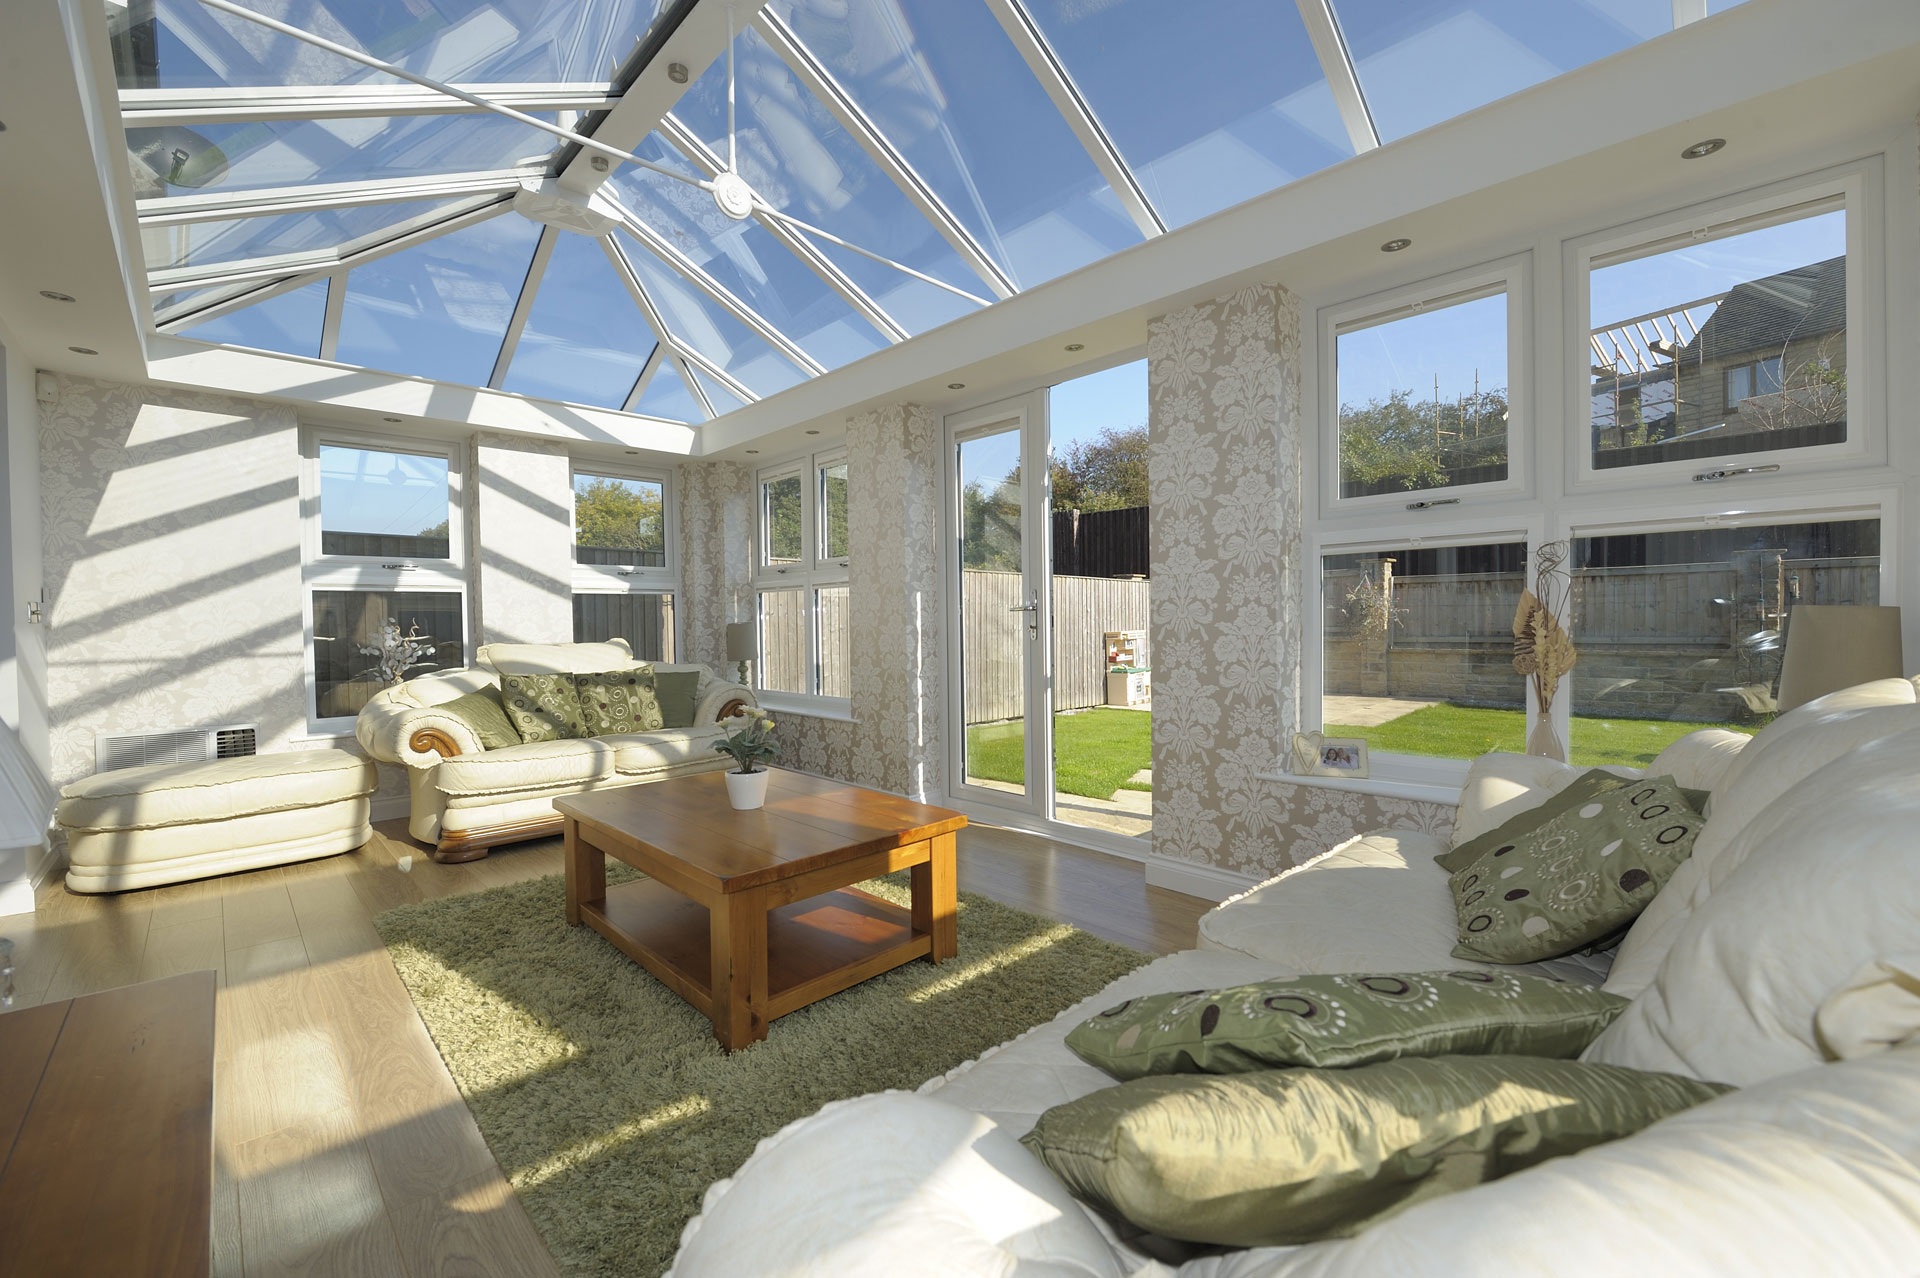 Conservatory with a glass roof and a garden view with sofas in.